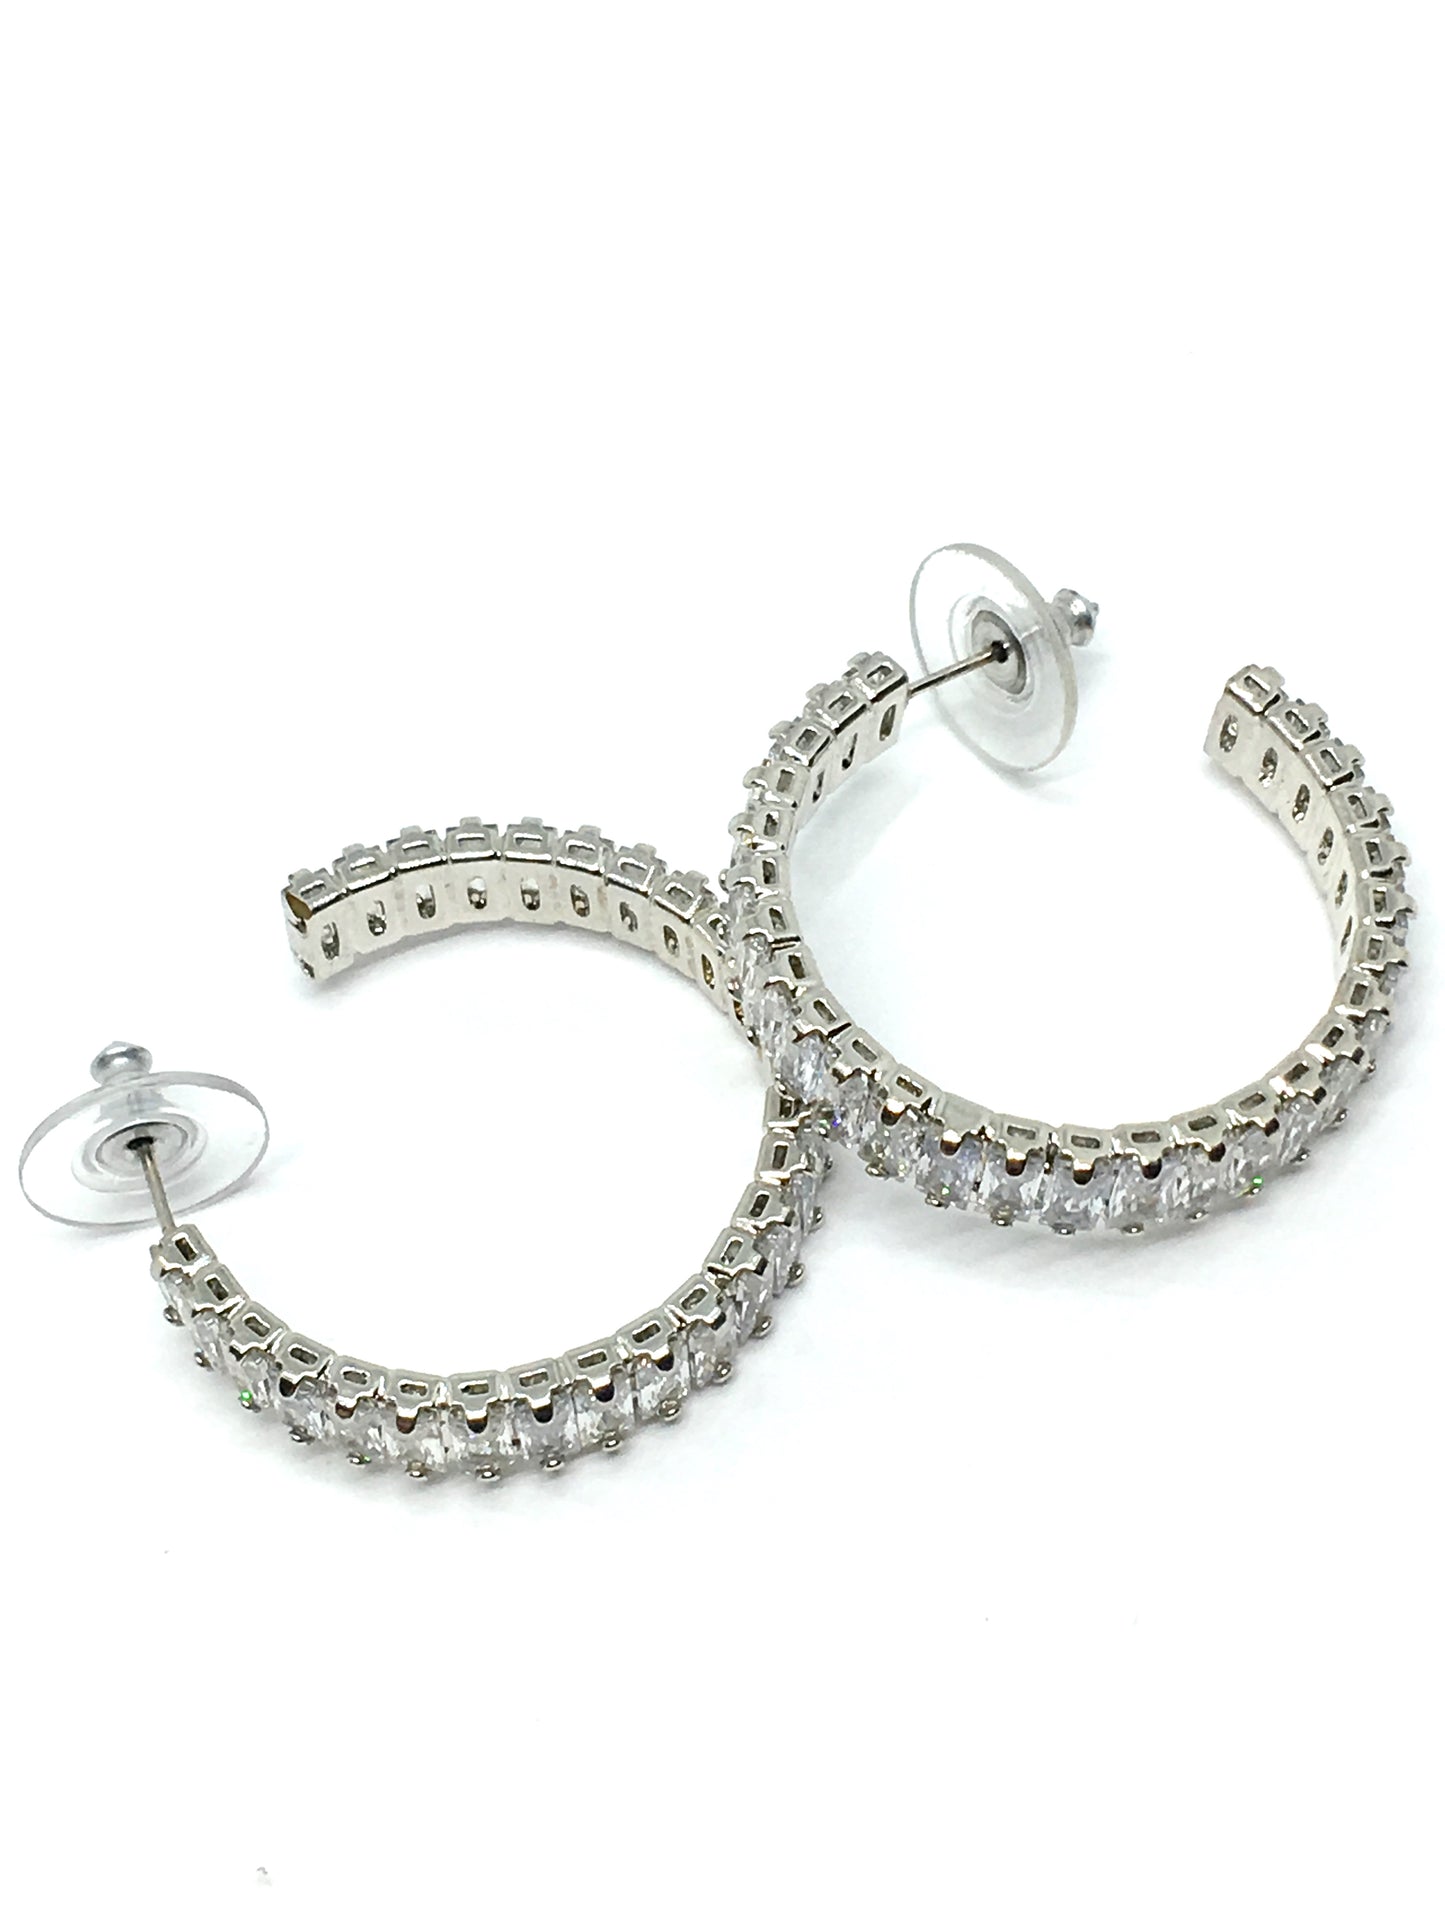 Fashion Jewelry - Womens used Sparkly Baguette CZ Silver Hoop Earrings